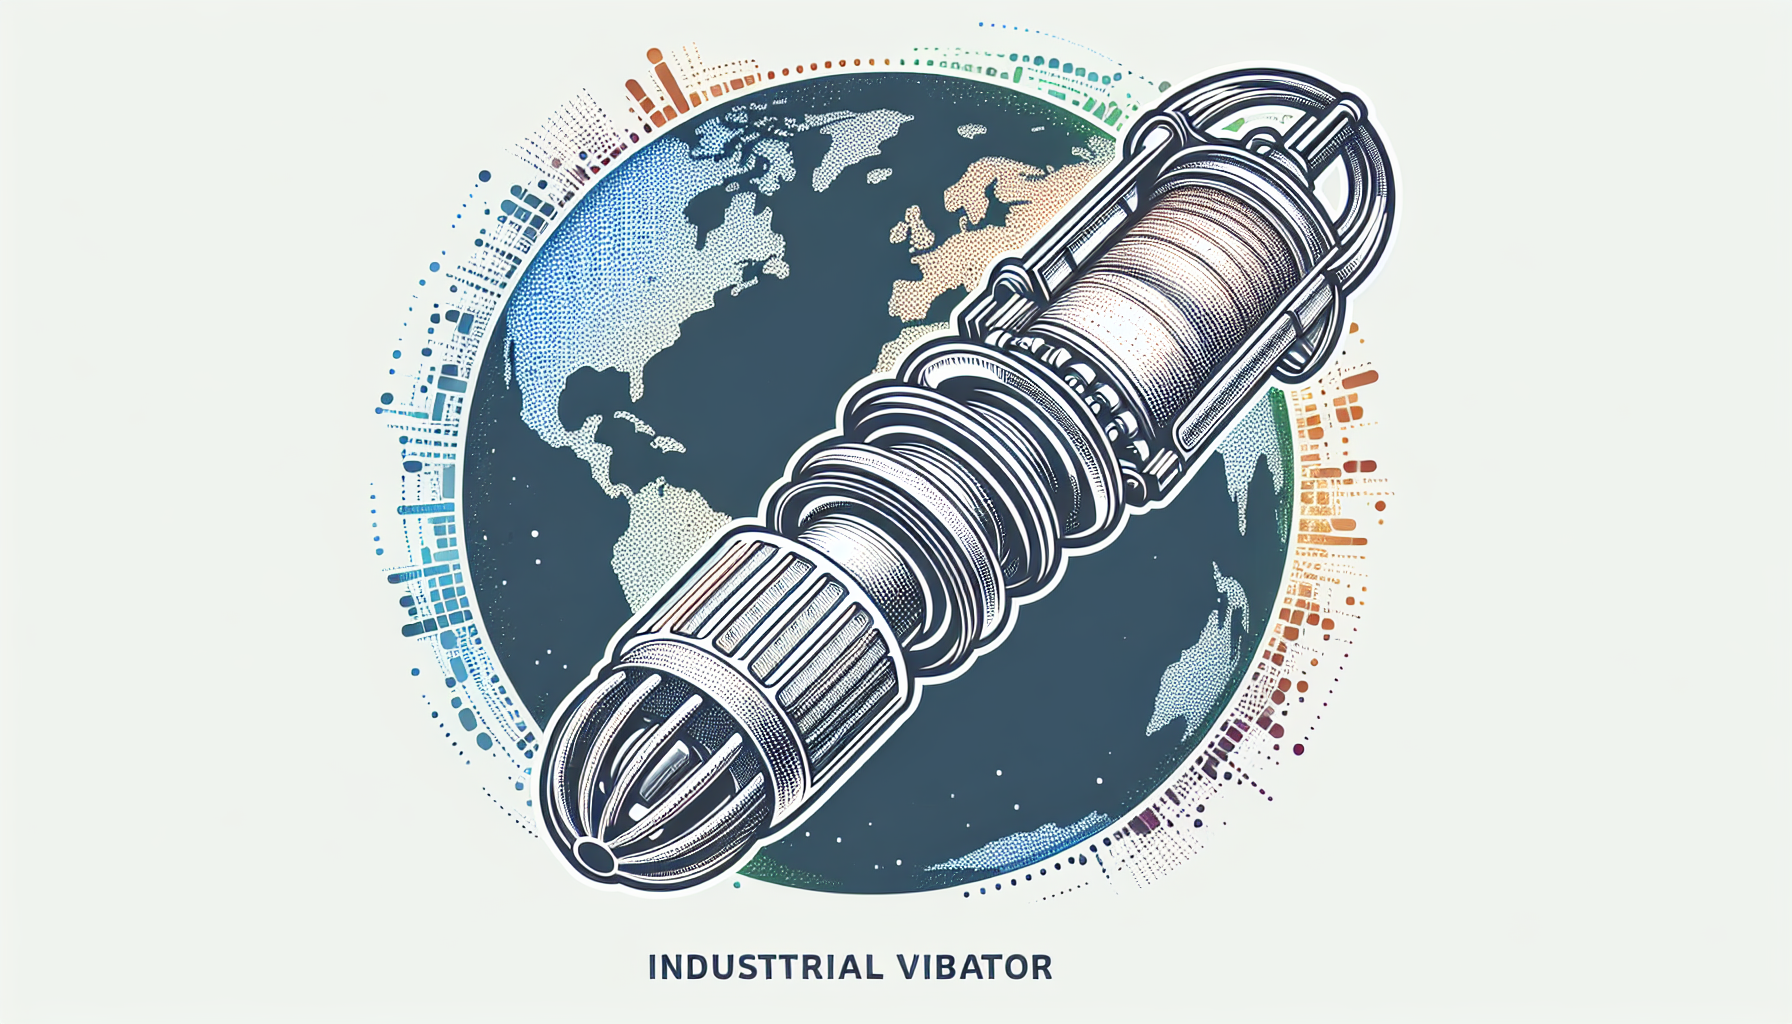 Where Can I Find Industrial Vibrators Globally?